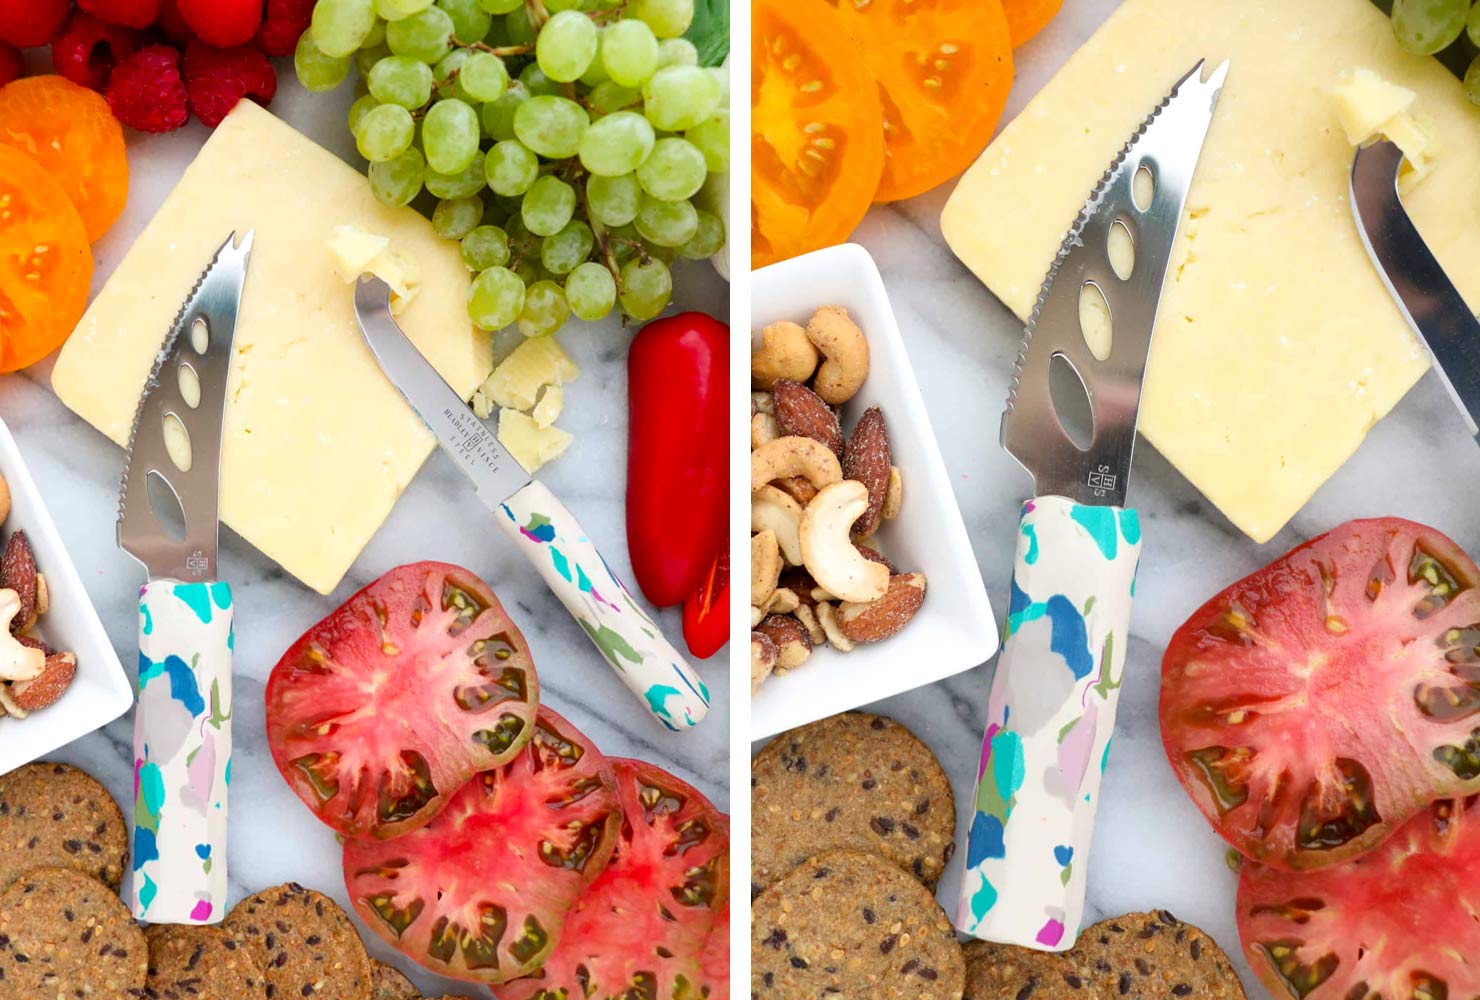 20 dollar gift ideas cheese knives 